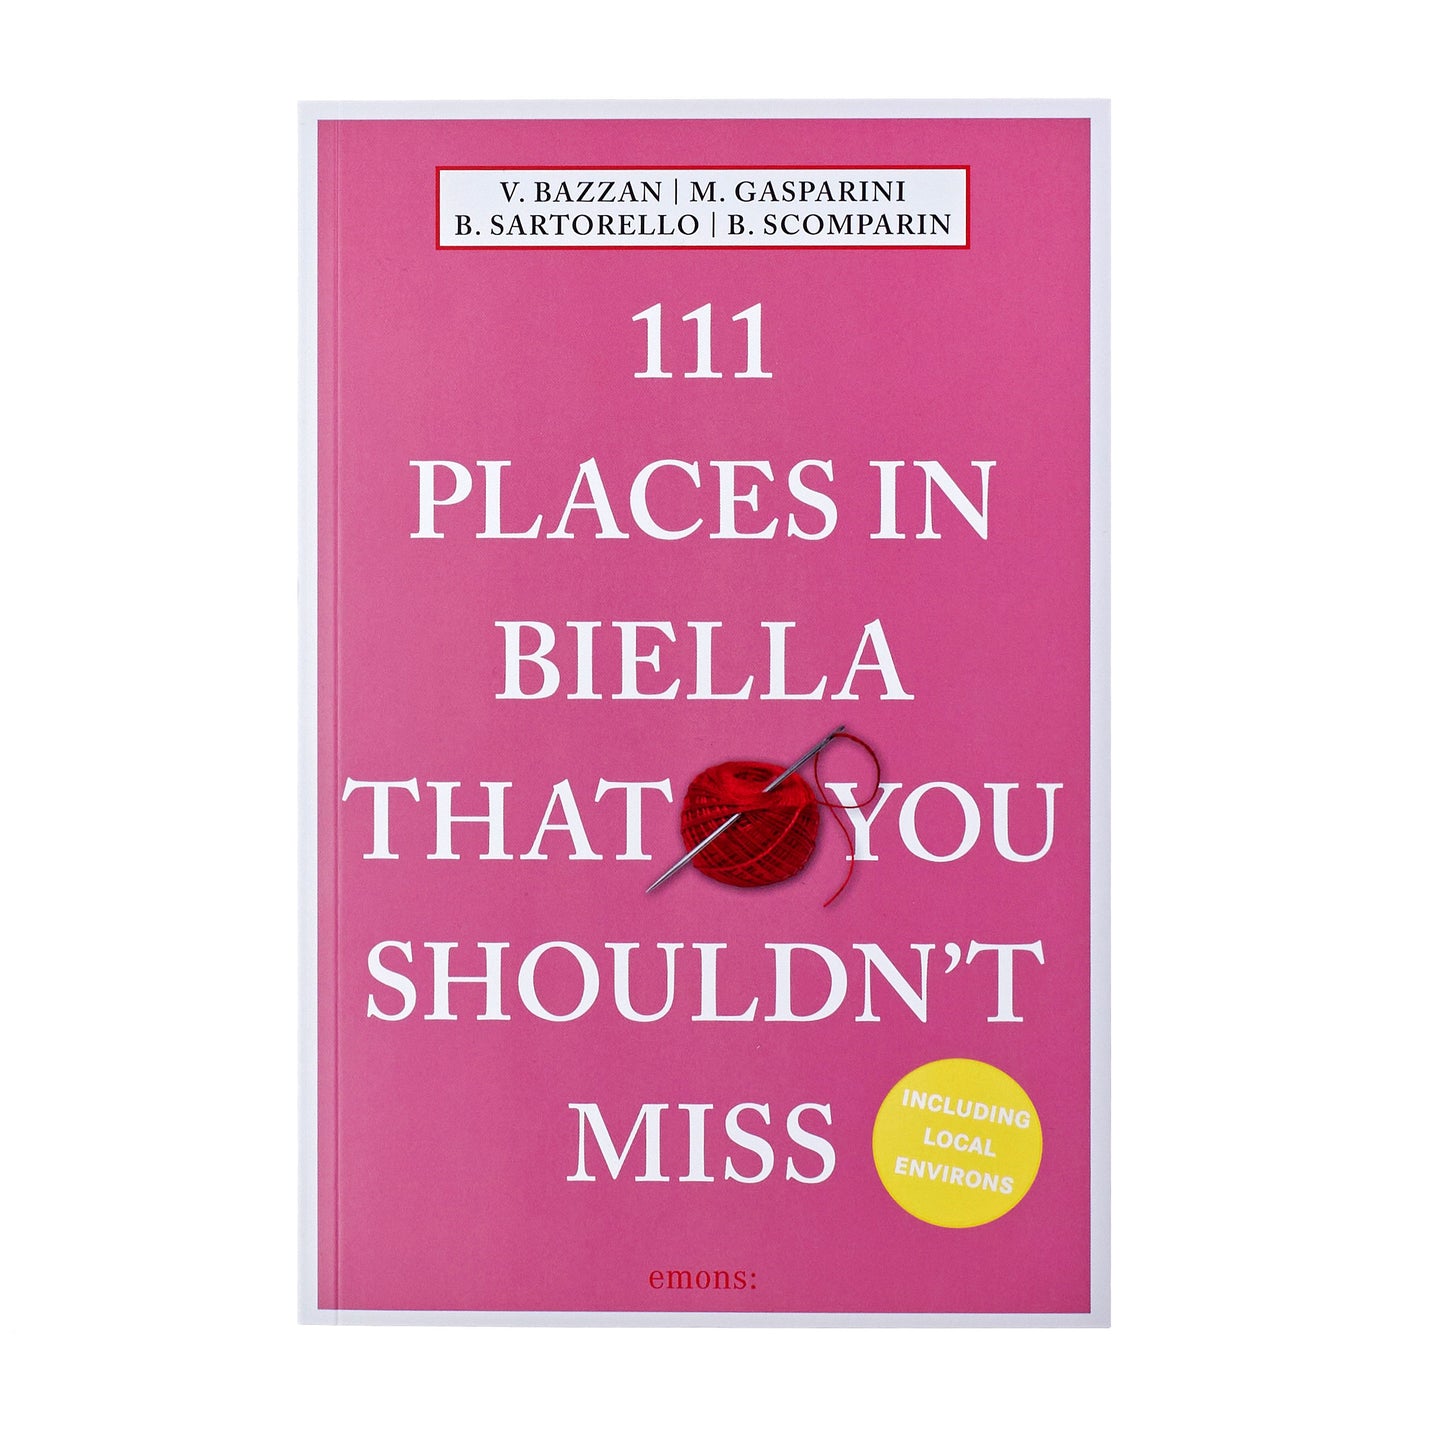 111 places in Biella that you shouldn't miss